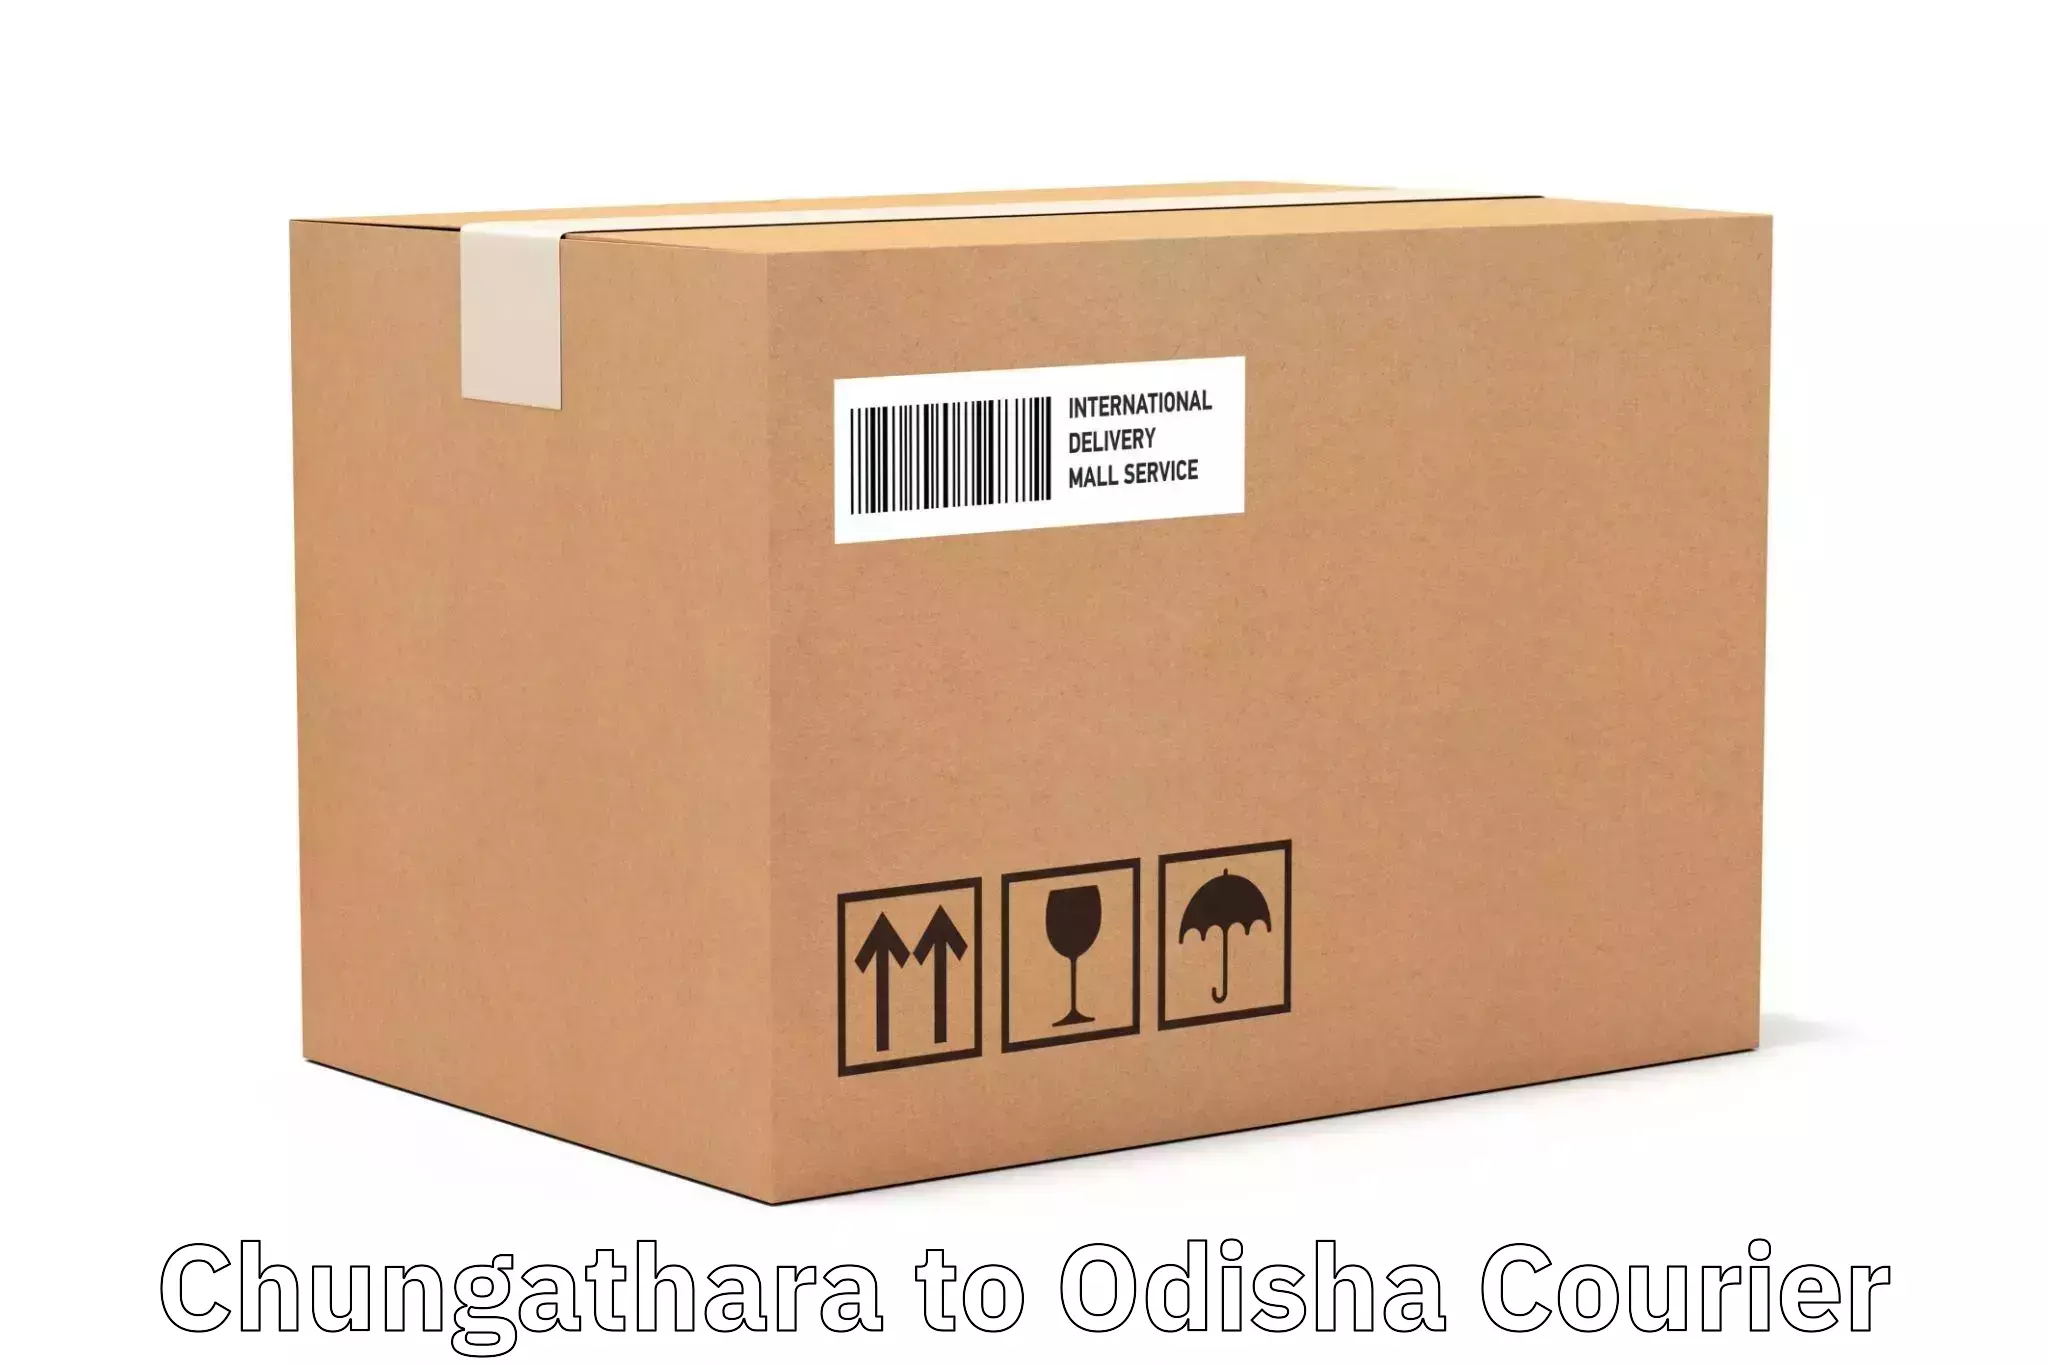 Customer-friendly courier services in Chungathara to Asika